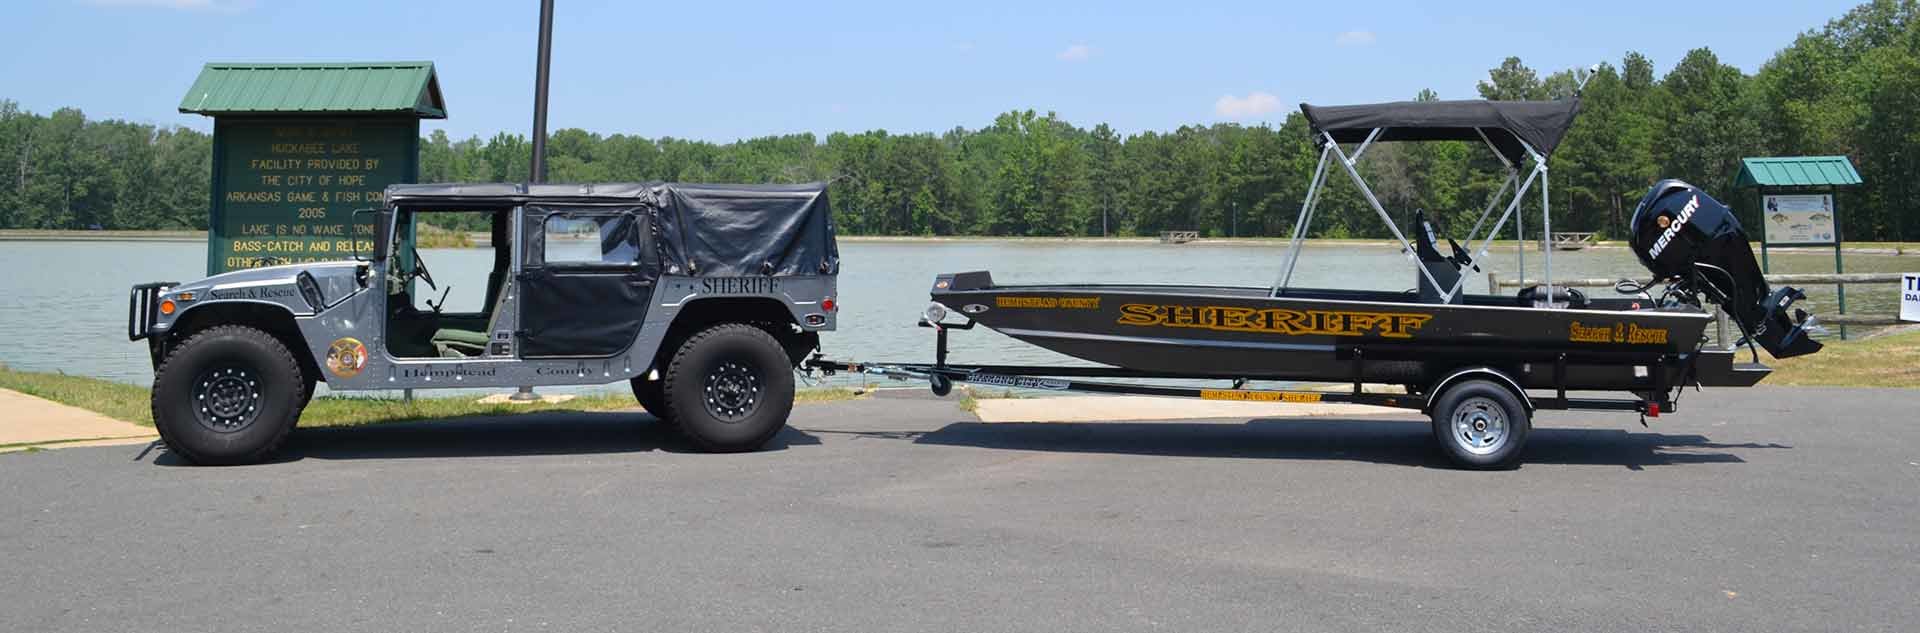 Sheriff Jeep and Boat